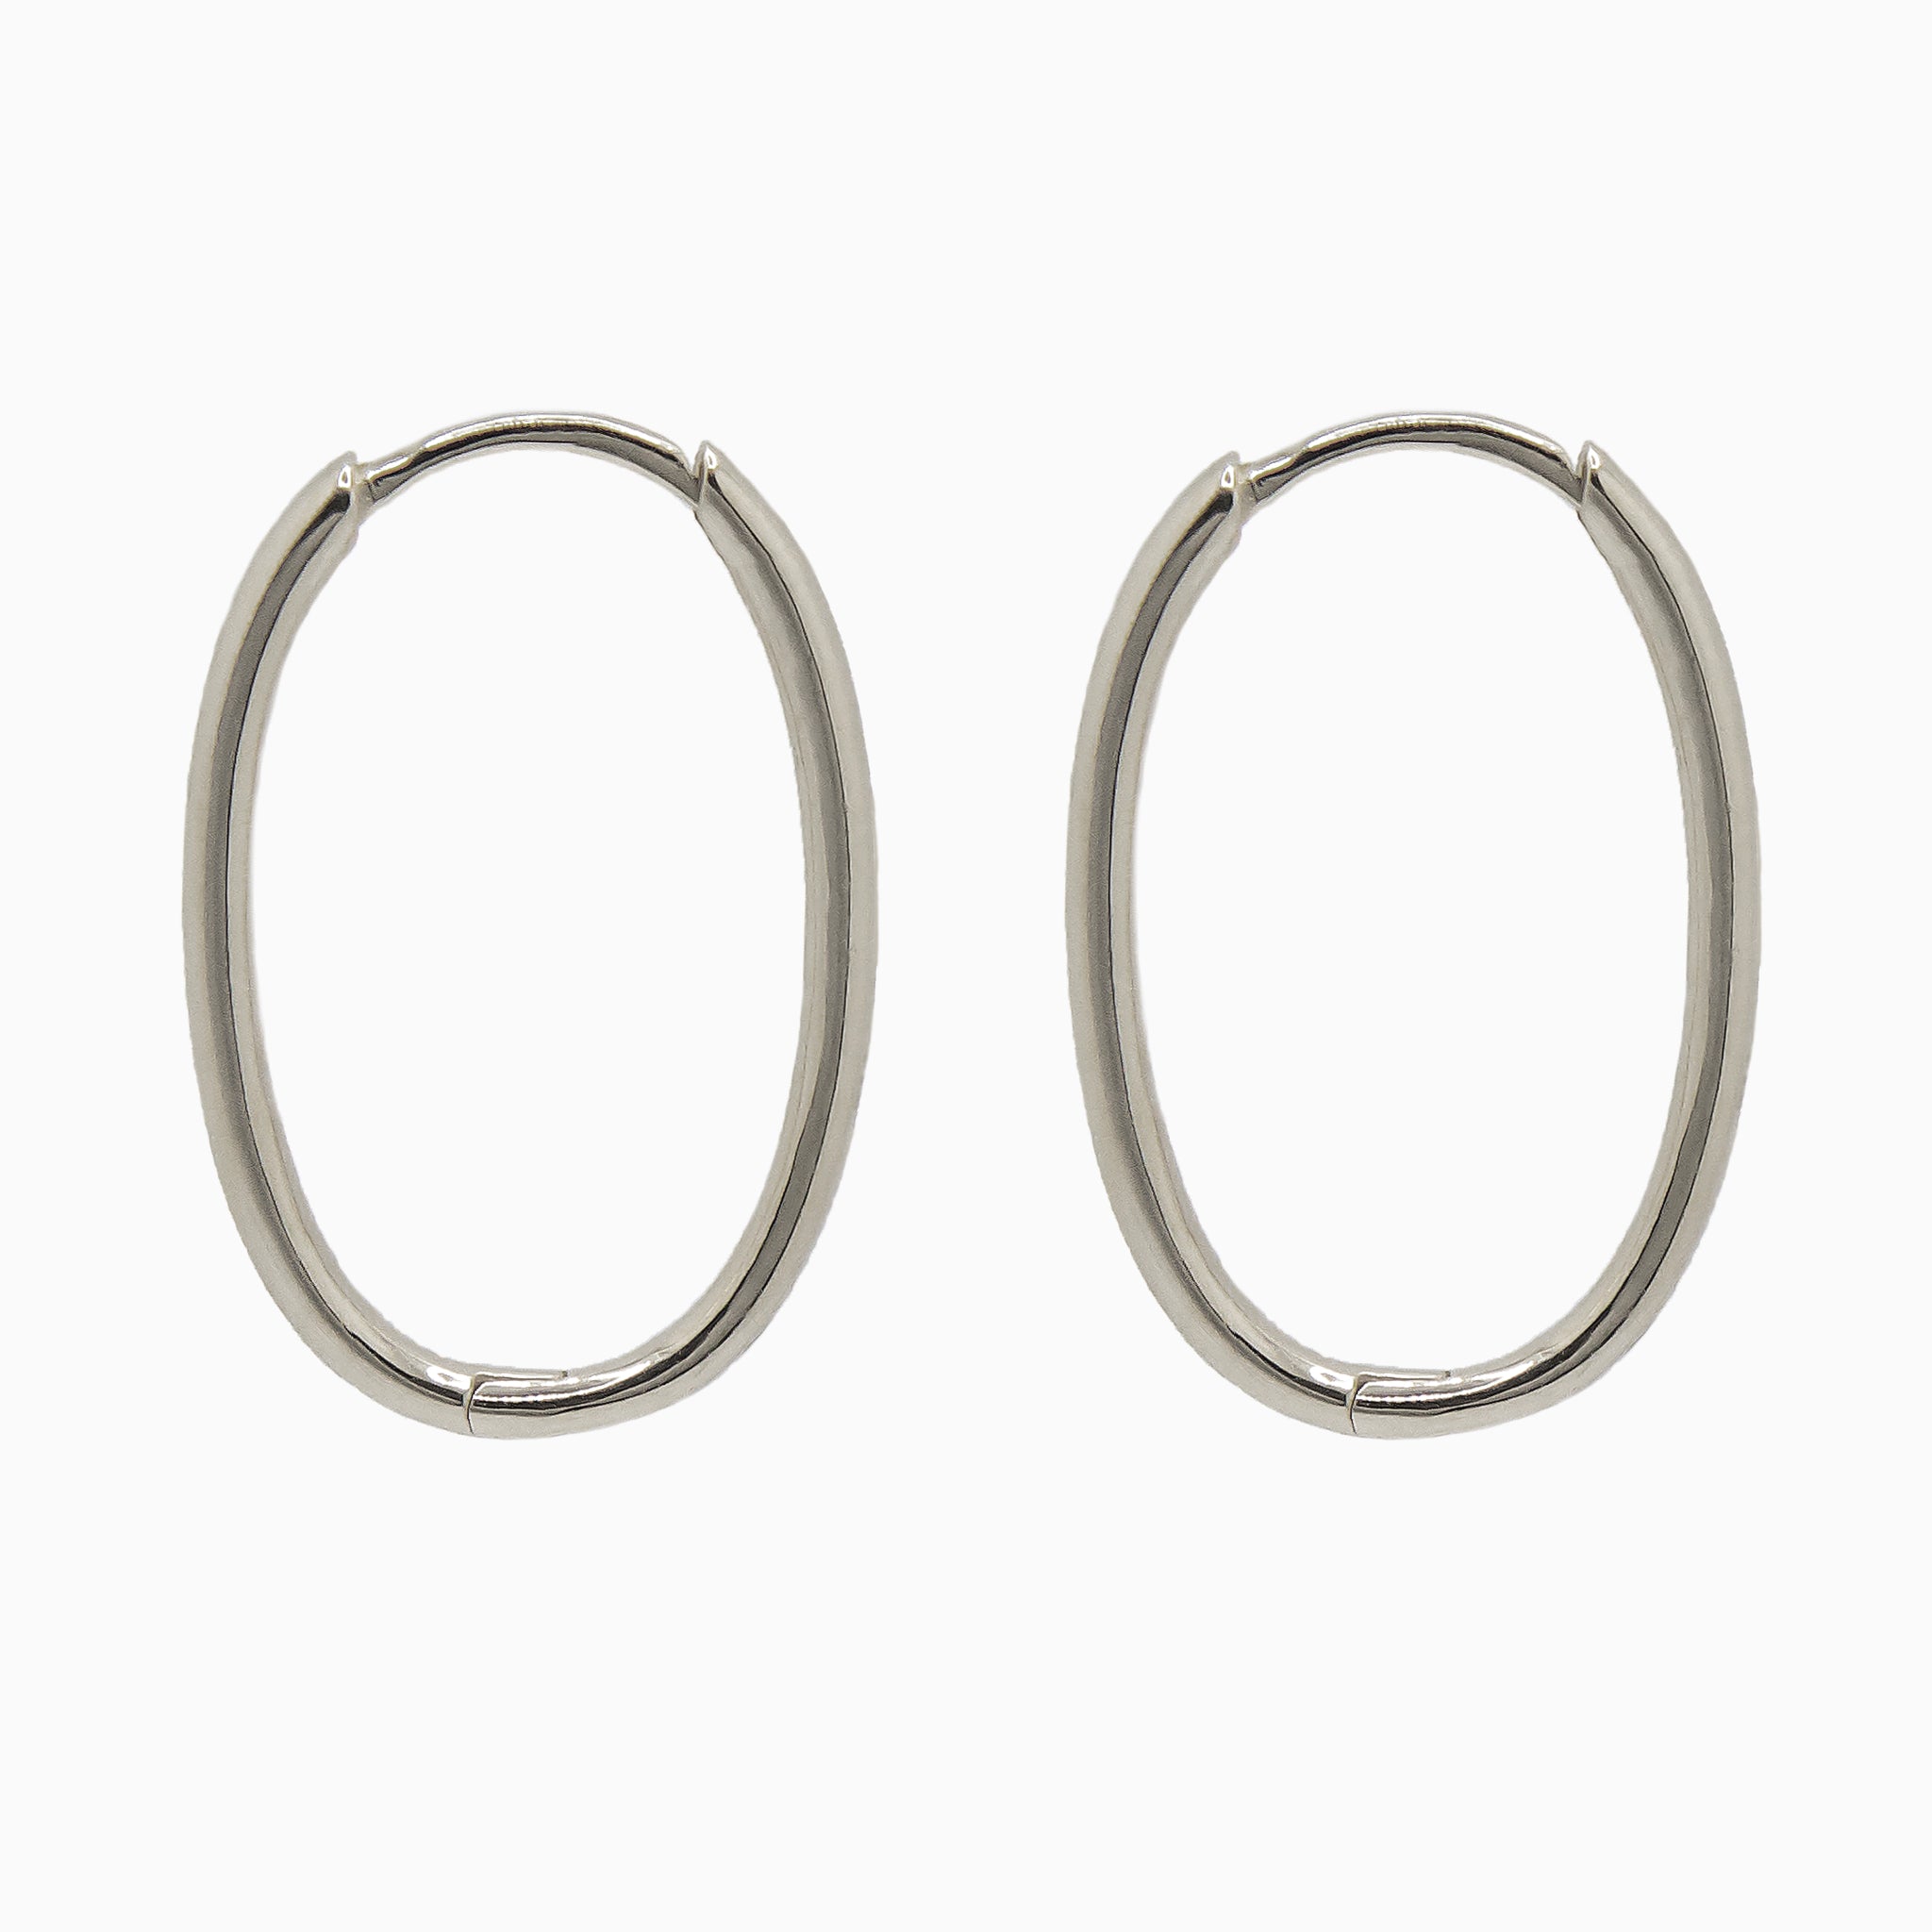 14k White Gold 23mm x 15mm Hinged Everyday Oval Hoop Earrings, Side View